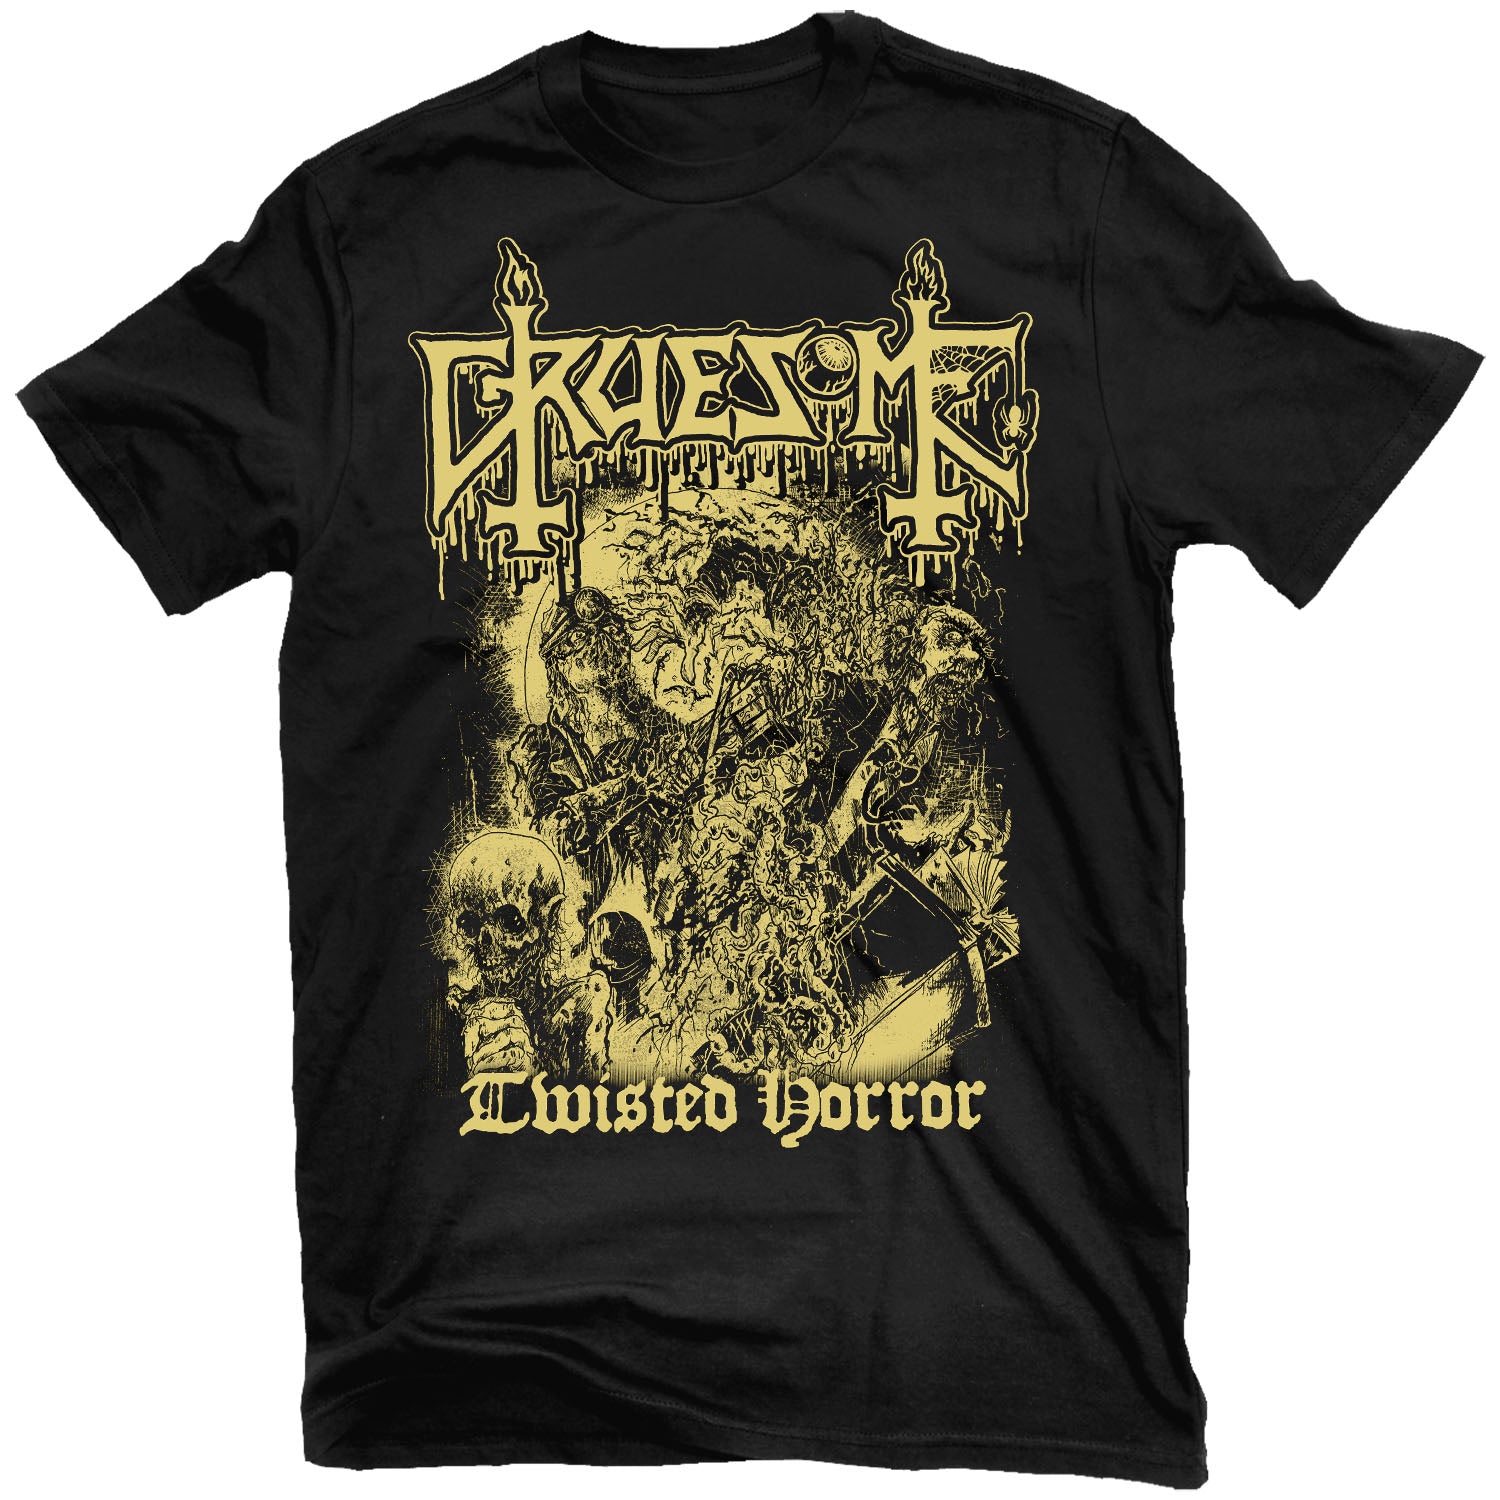 Gruesome "Twisted Horror" T-Shirt